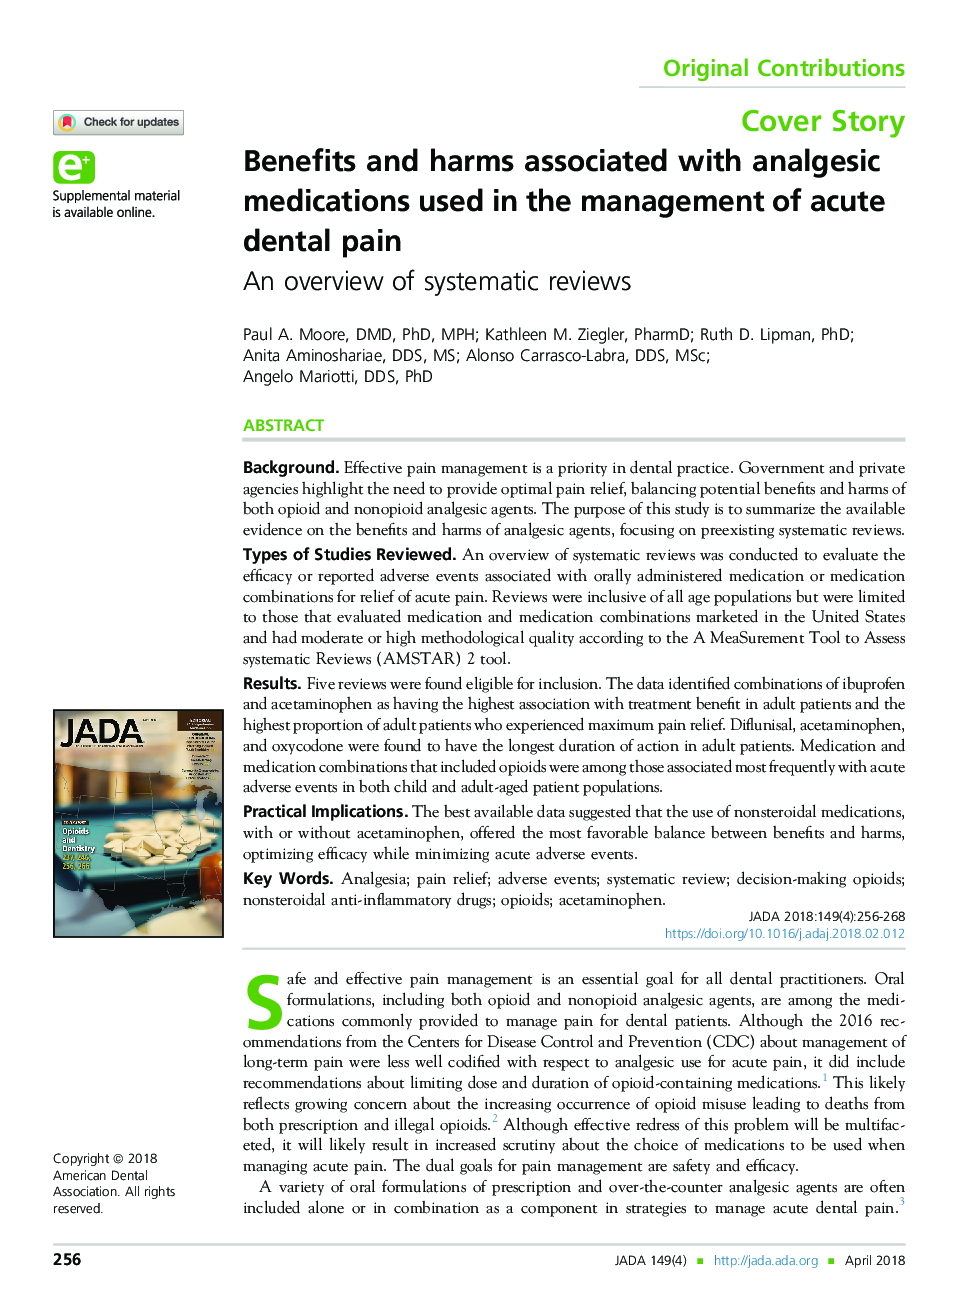 Benefits and harms associated with analgesic medications used in the management of acute dental pain